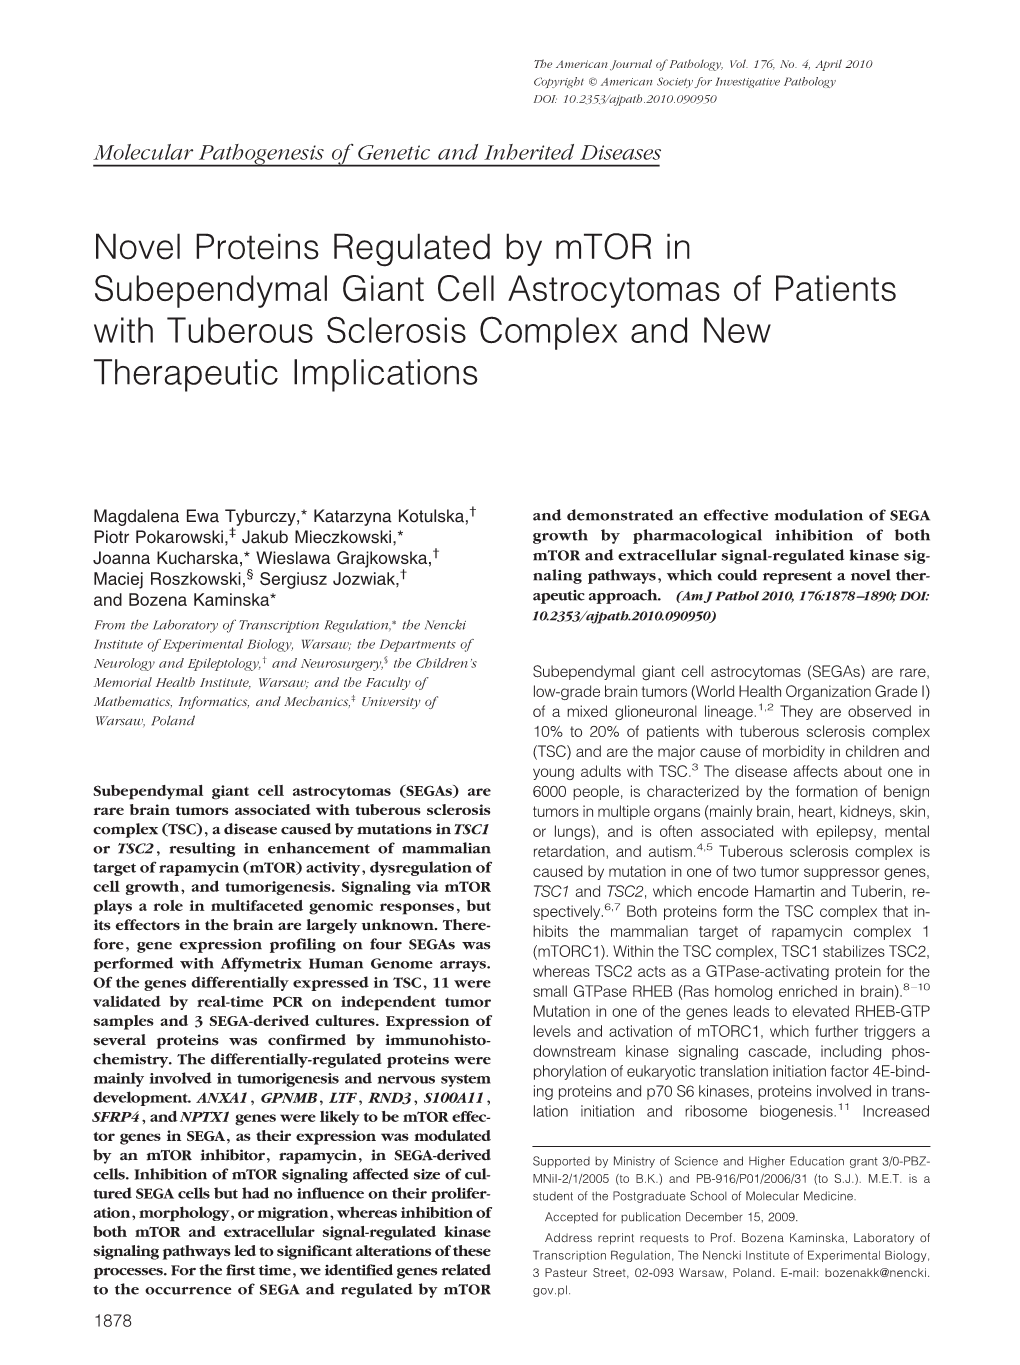 Novel Proteins Regulated by Mtor in Subependymal Giant Cell Astrocytomas of Patients with Tuberous Sclerosis Complex and New Therapeutic Implications